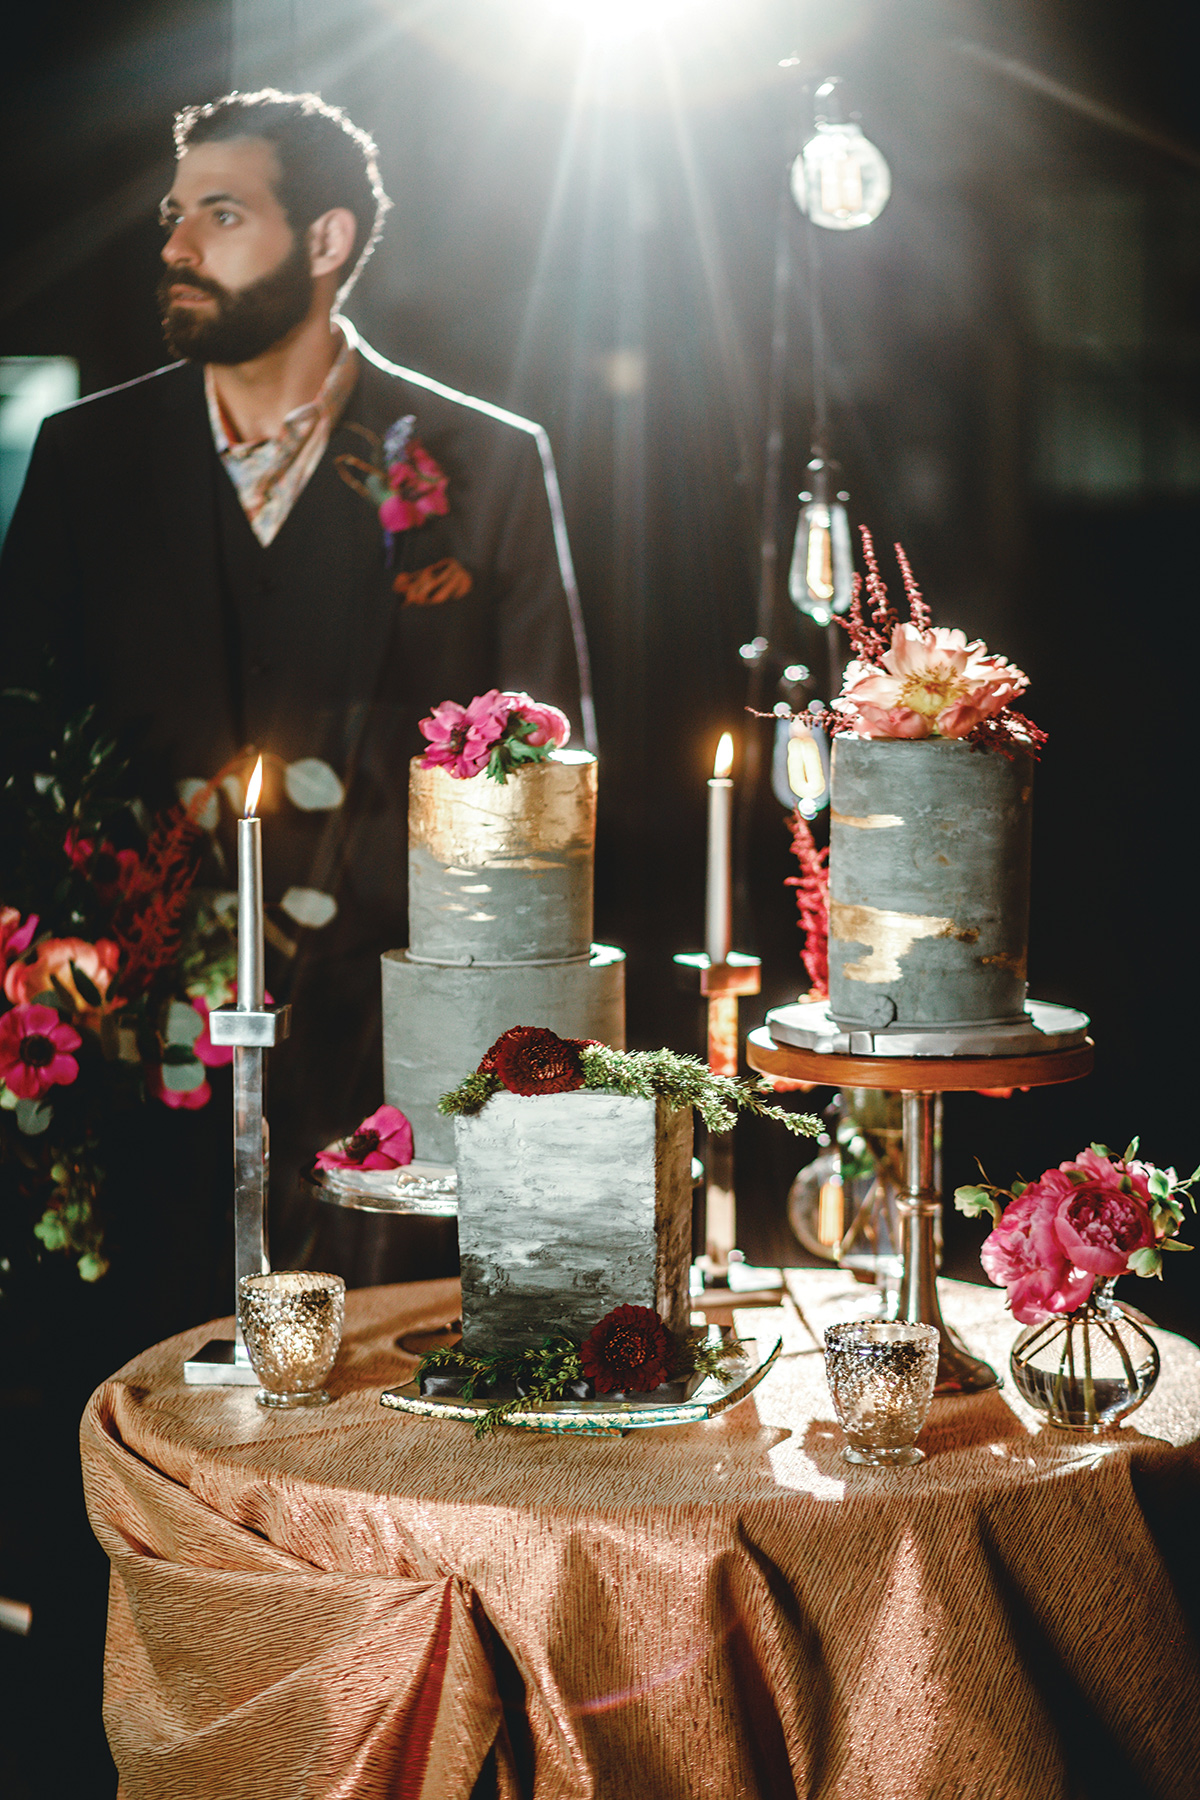 A styled shoot created for Weddings in Houston Magazine and Website - Kat Creech Events, Ama Photogr